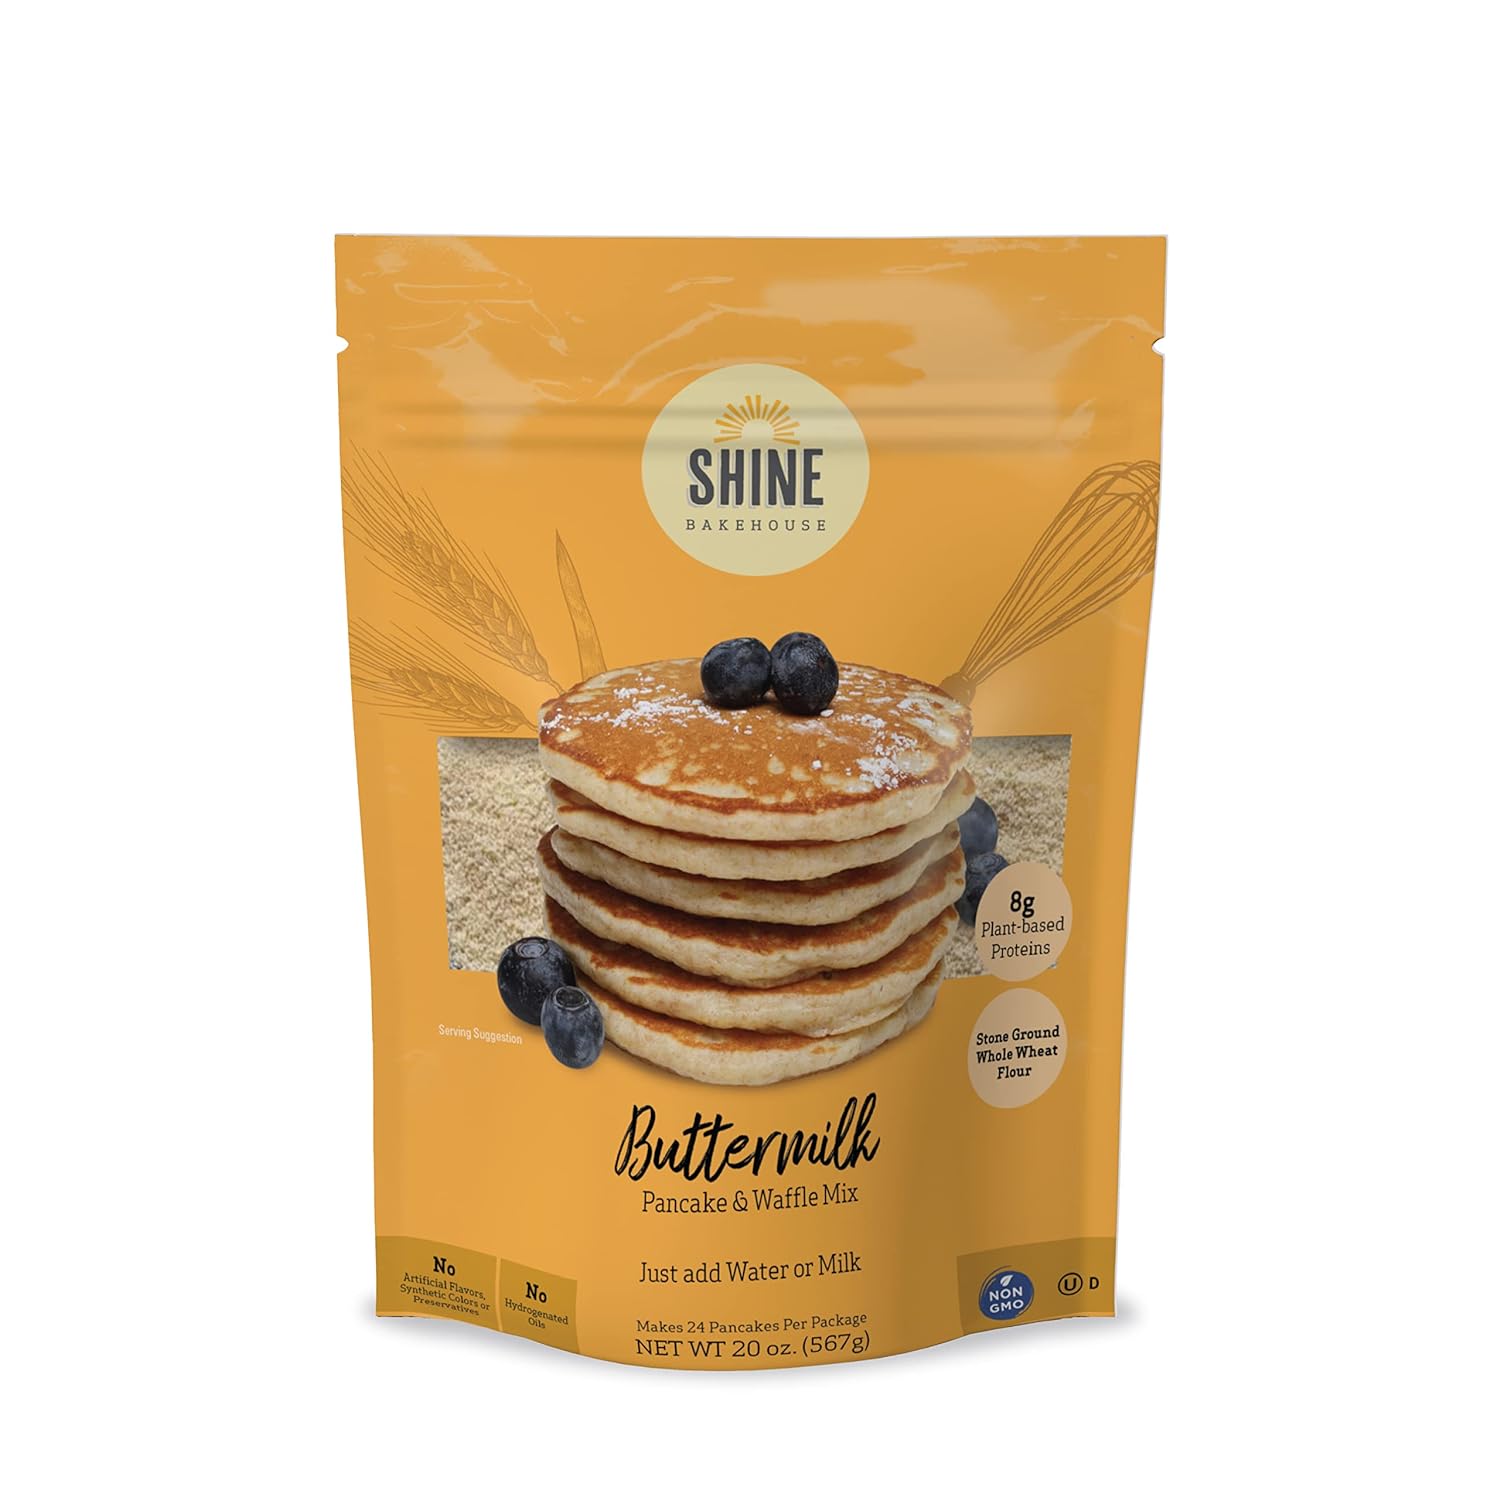 Buttermilk Pancake Mix by Shine Bakehouse – Baking Mix for Homemade Buttermilk Pancakes or Waffles, Made with 8g of Plant-Based Protein per Serving, Makes 24 Pancakes, 20 oz (1pk)